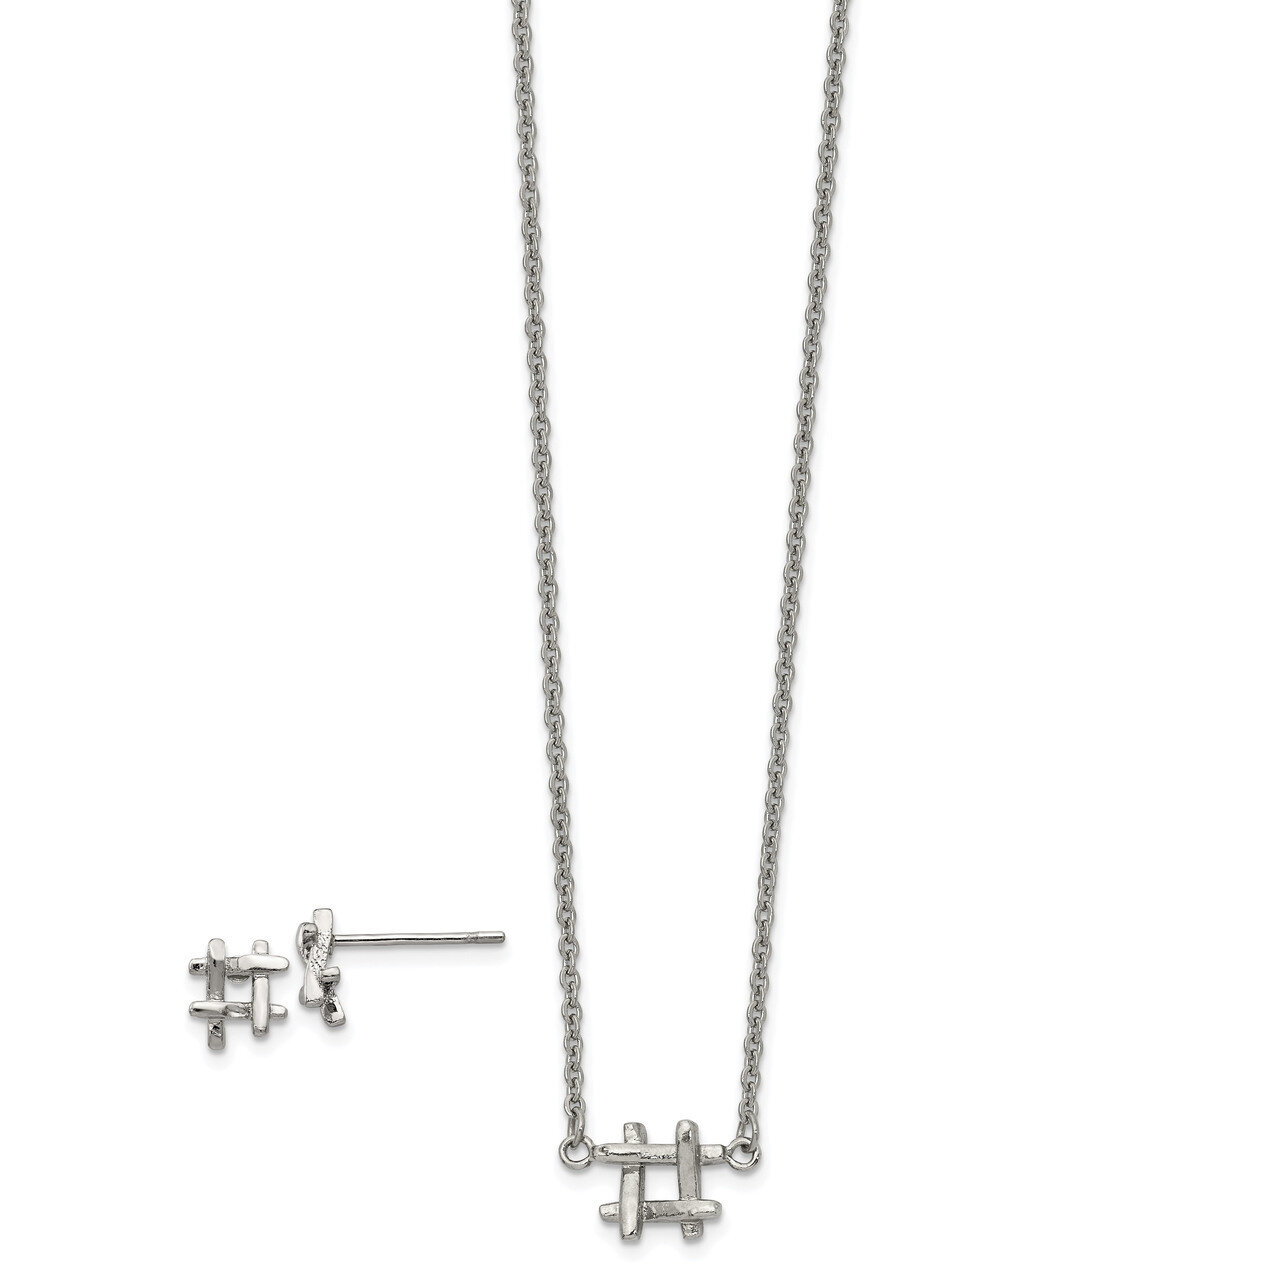 HashTag 16 Inch with 2 Inch Extender Necklace and Earring Set Stainless Steel Polished SRSET40